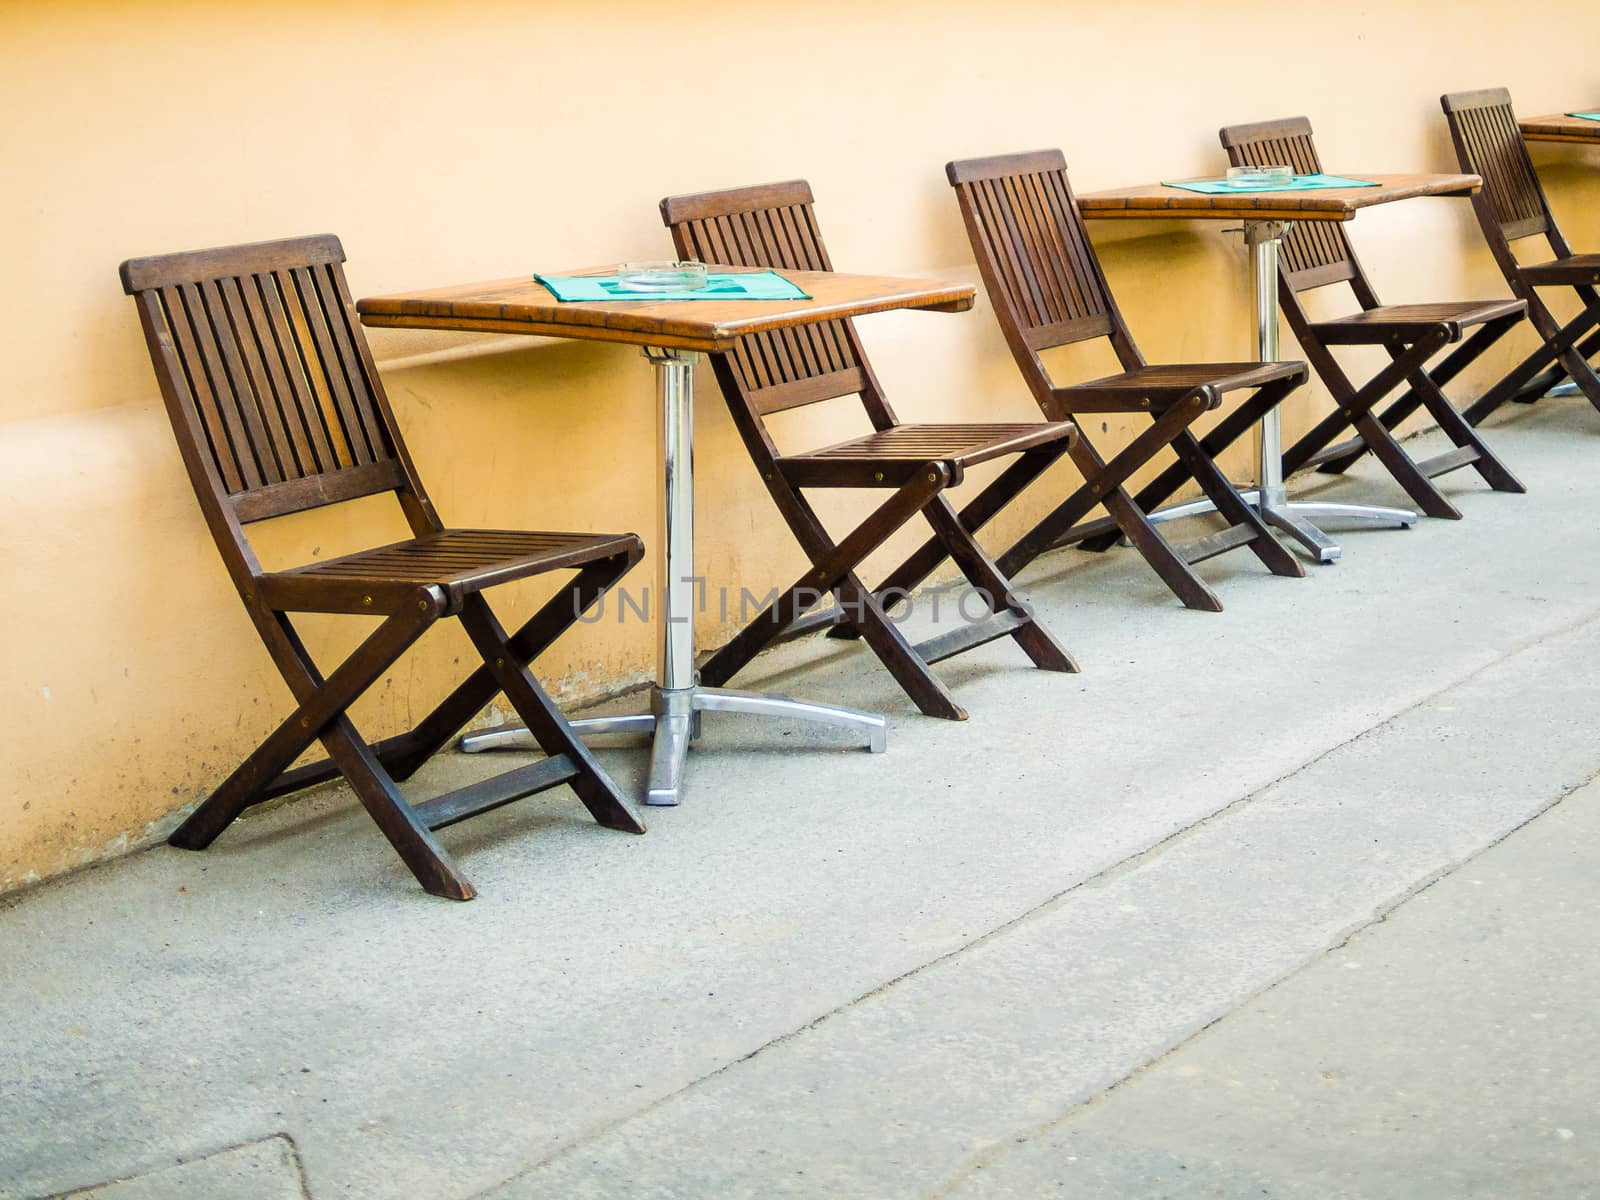 Chairs and tables on the street - coffe, pub by weruskak